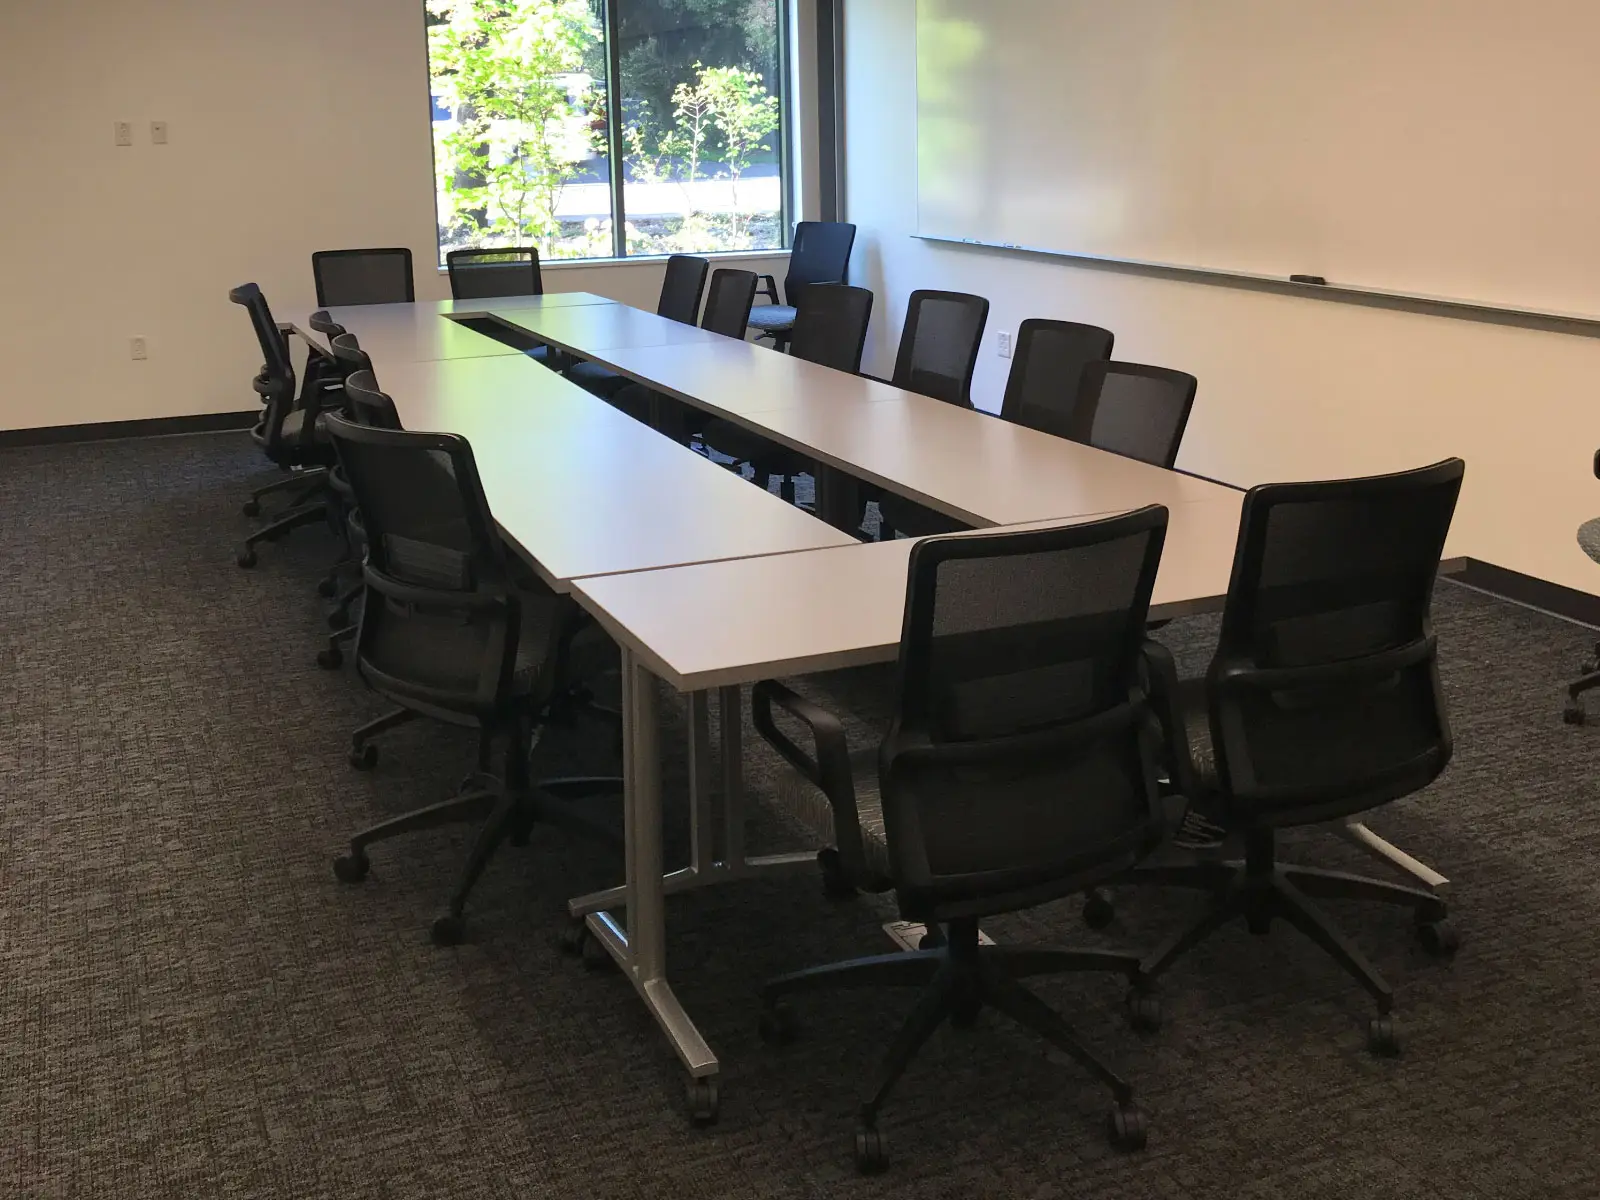 A long meeting table with many chairs in a Harmony campus conference room